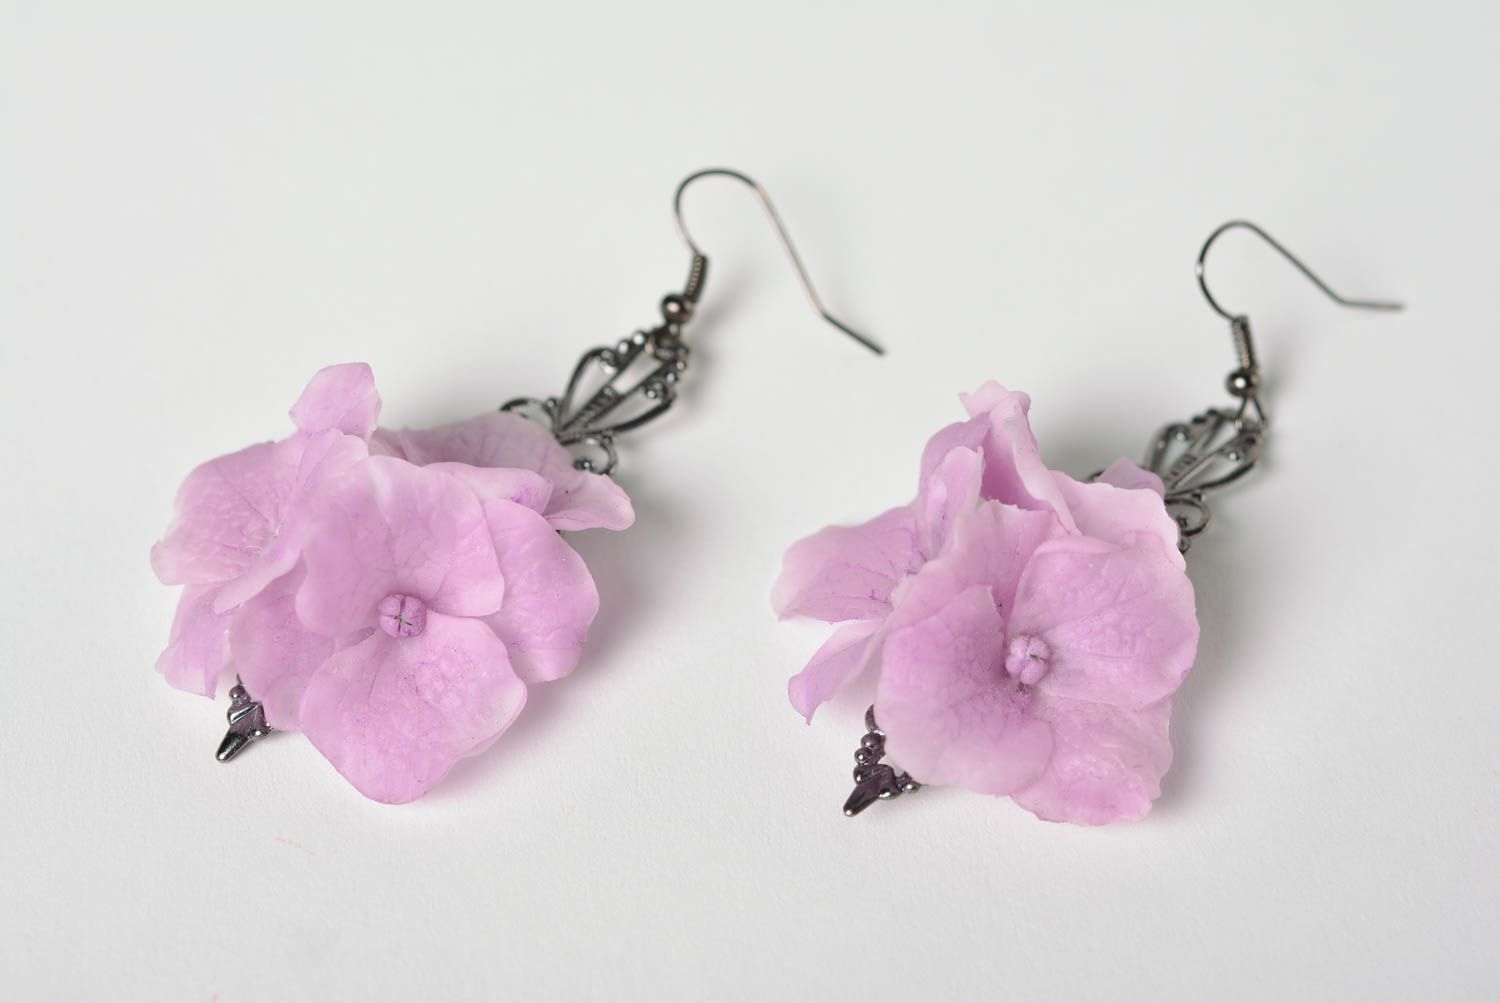 Acrylic drop earrings with pink flowers for women 0,03 lb with metal wires photo 2